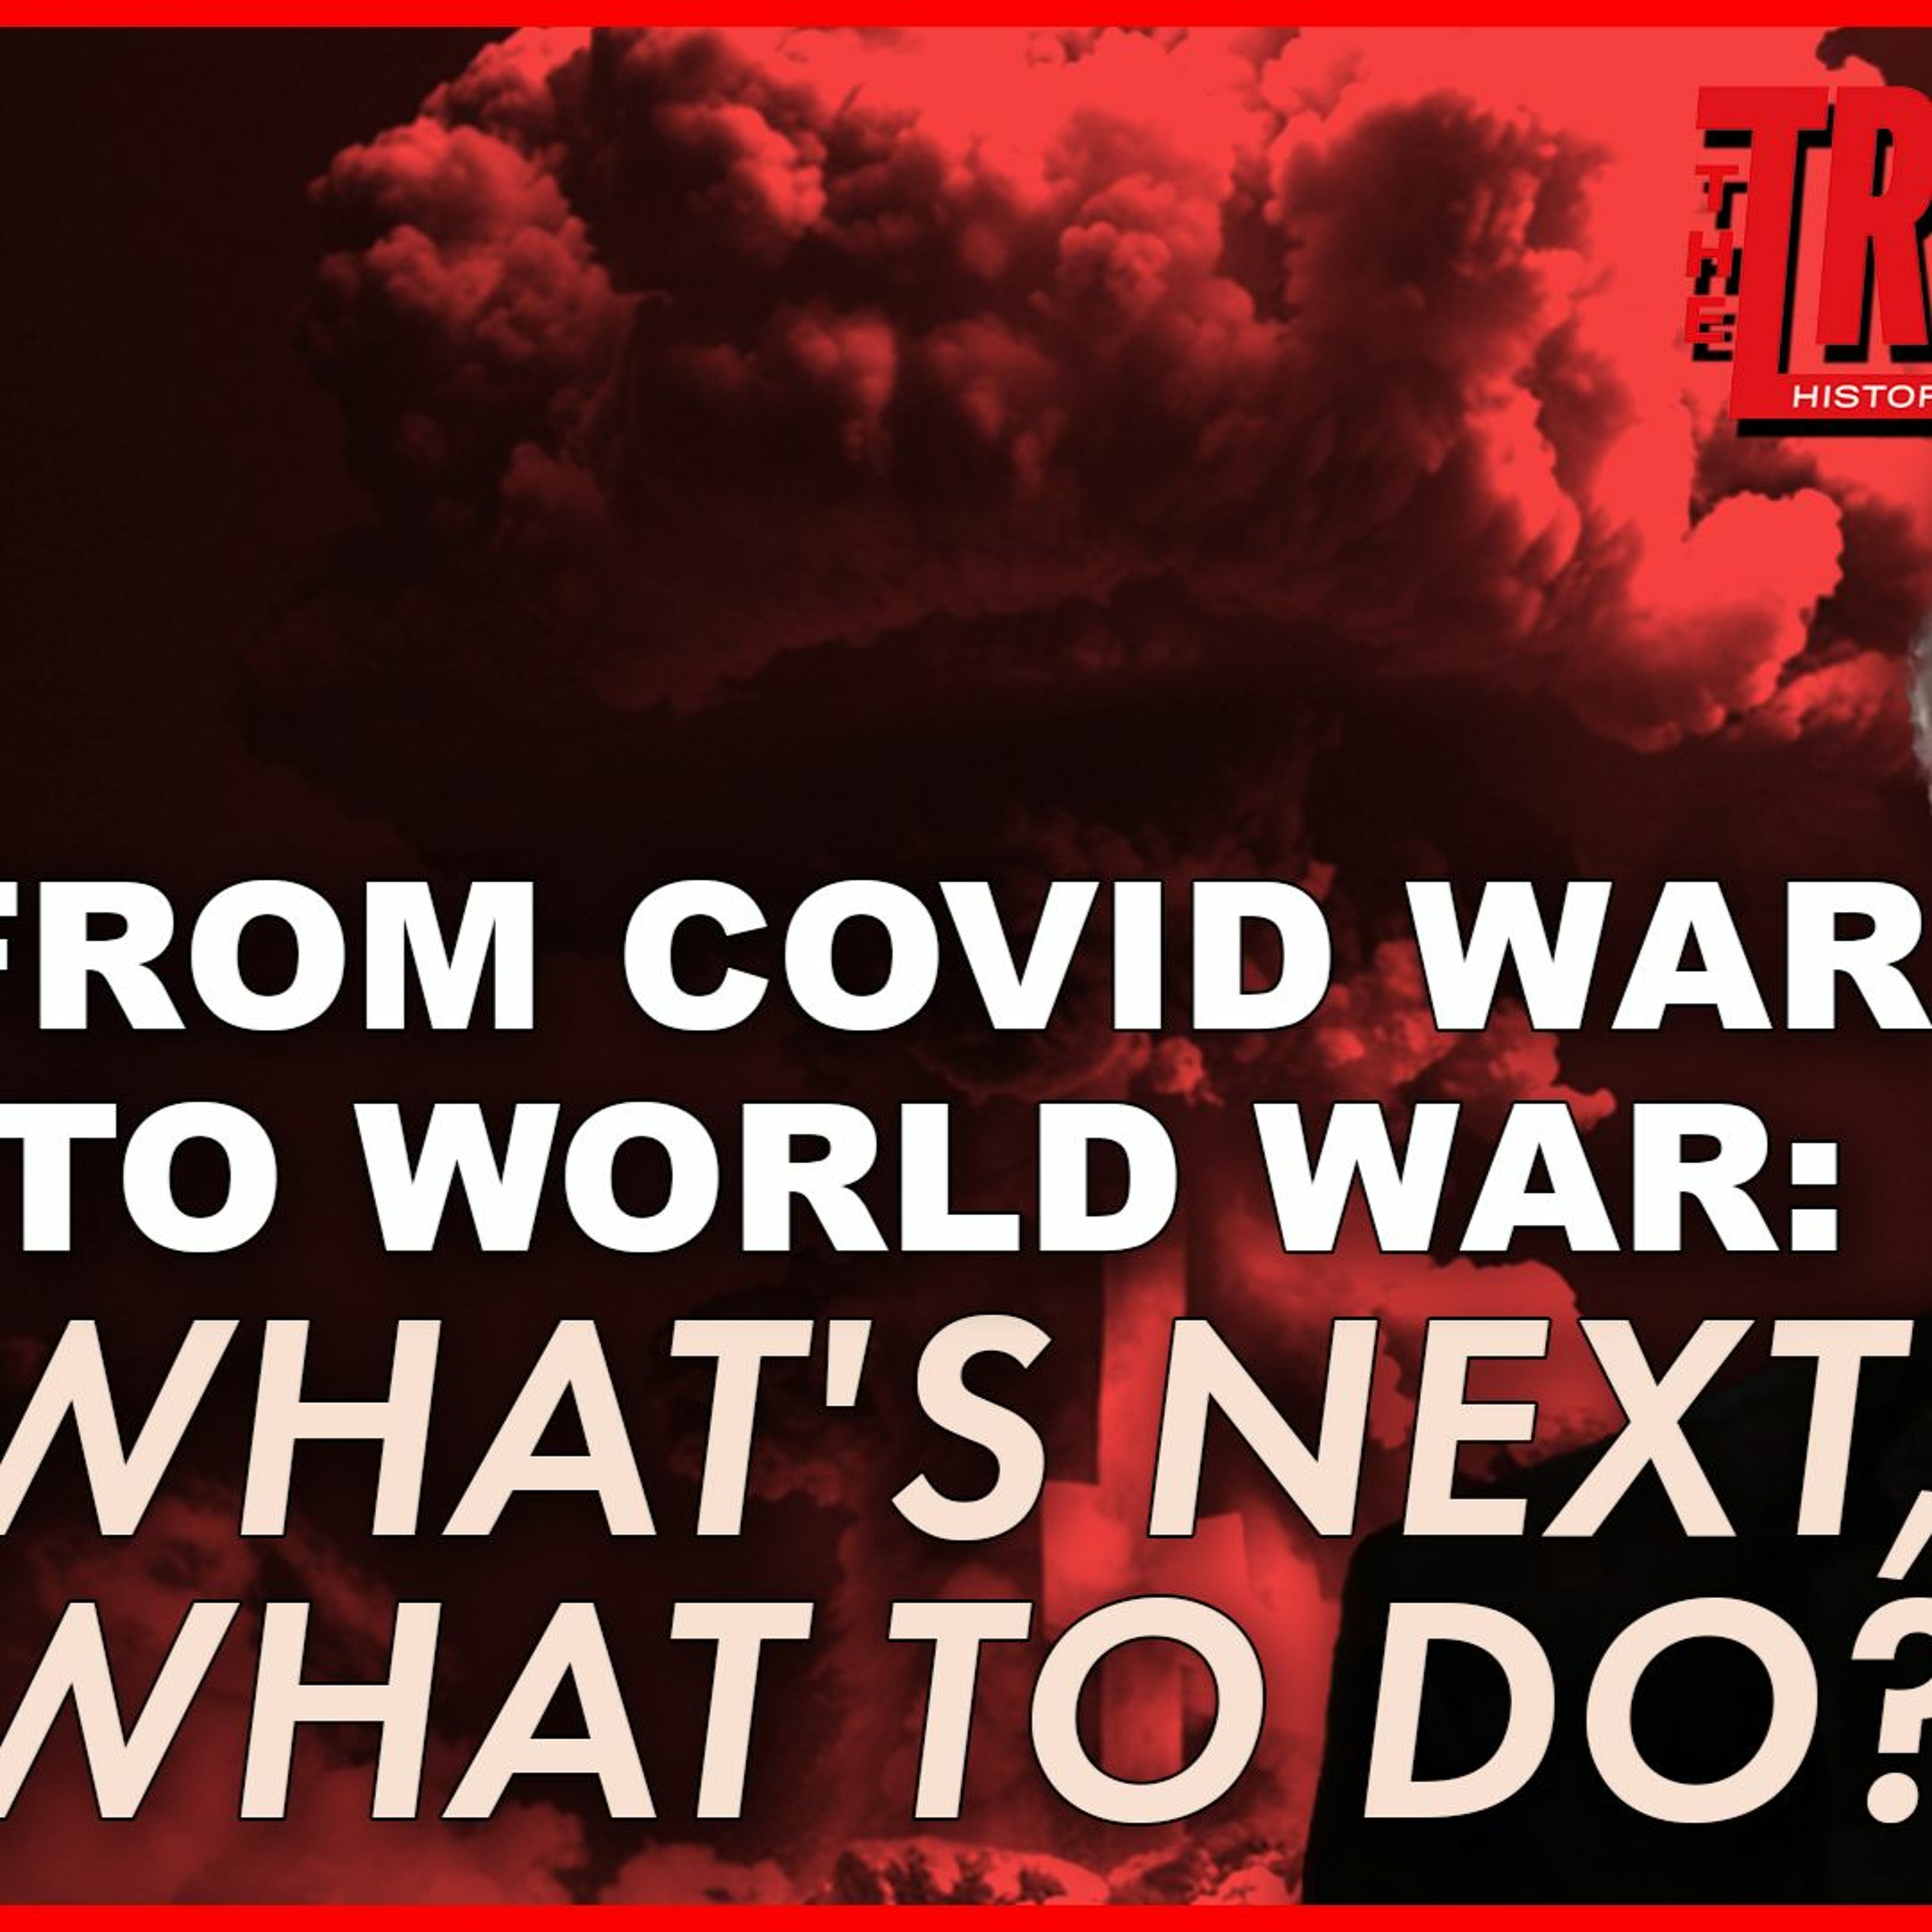 FROM COVID WAR TO WORLD WAR: WHAT’S NEXT, WHAT TO DO?